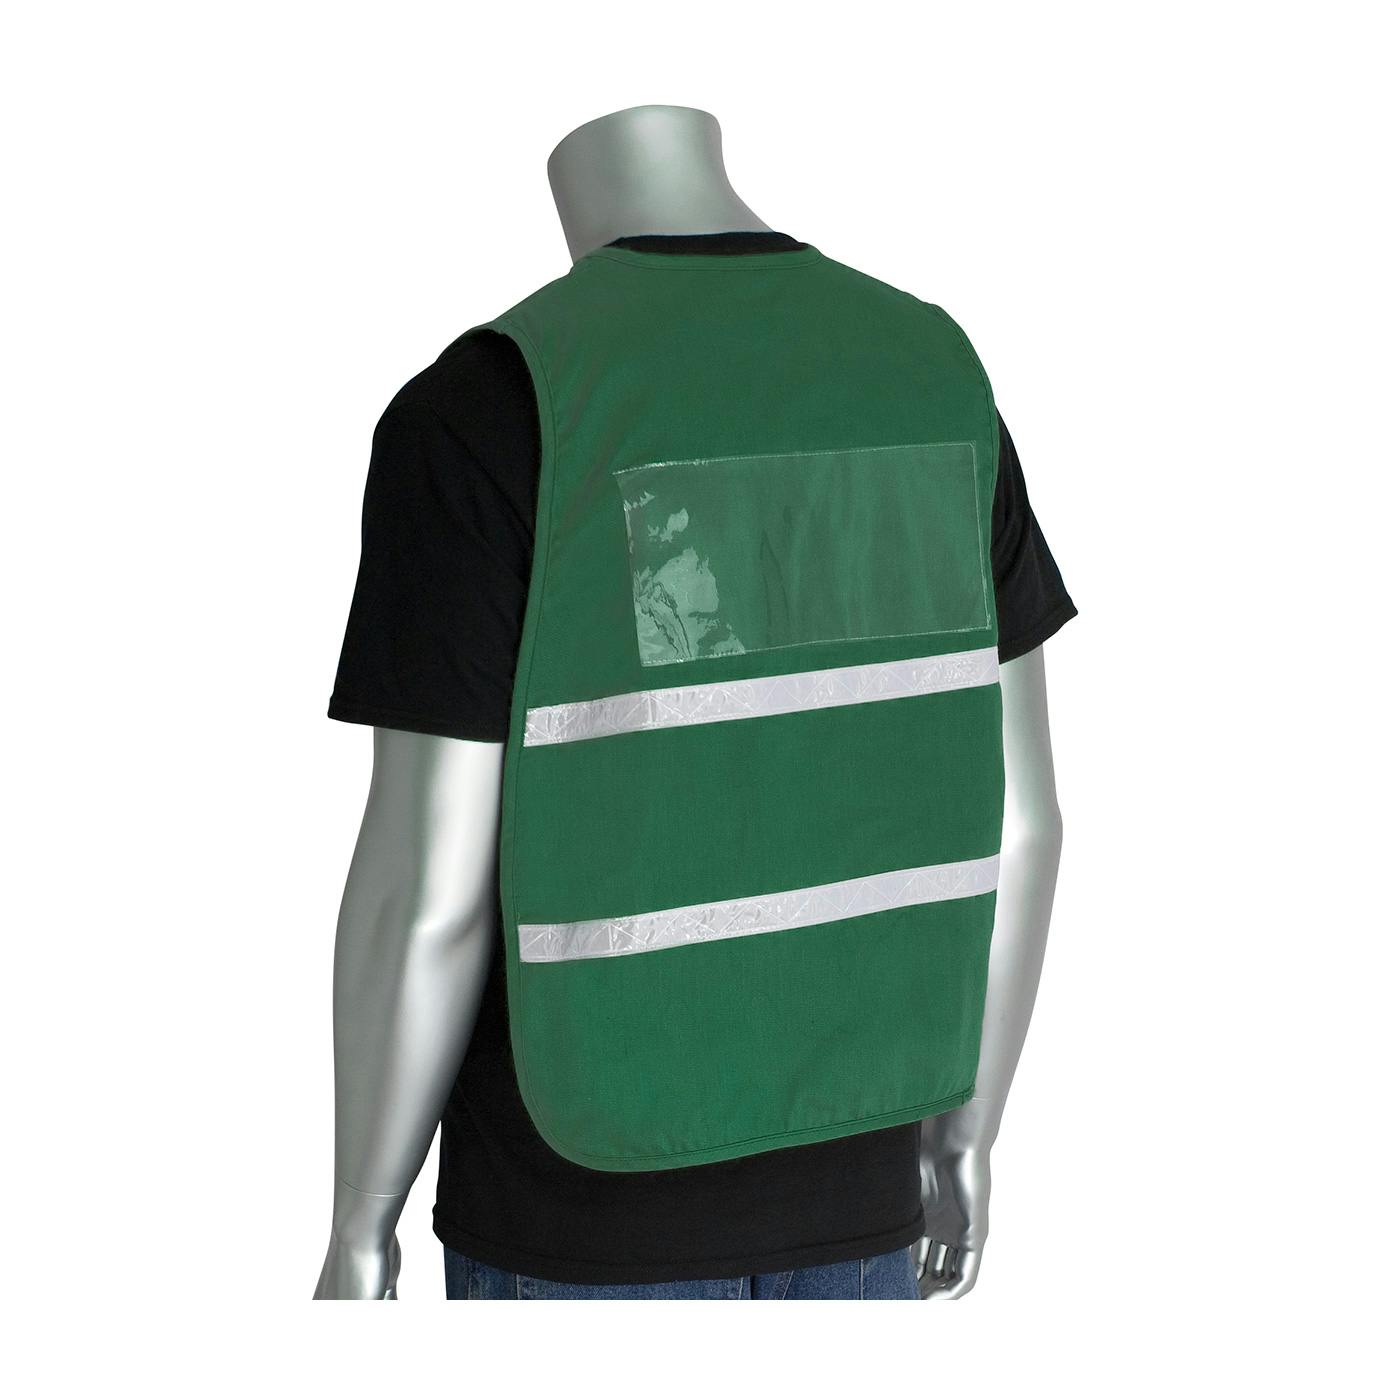 Non-ANSI Incident Command Vest - Cotton/Polyester Blend, Green (300-2514)